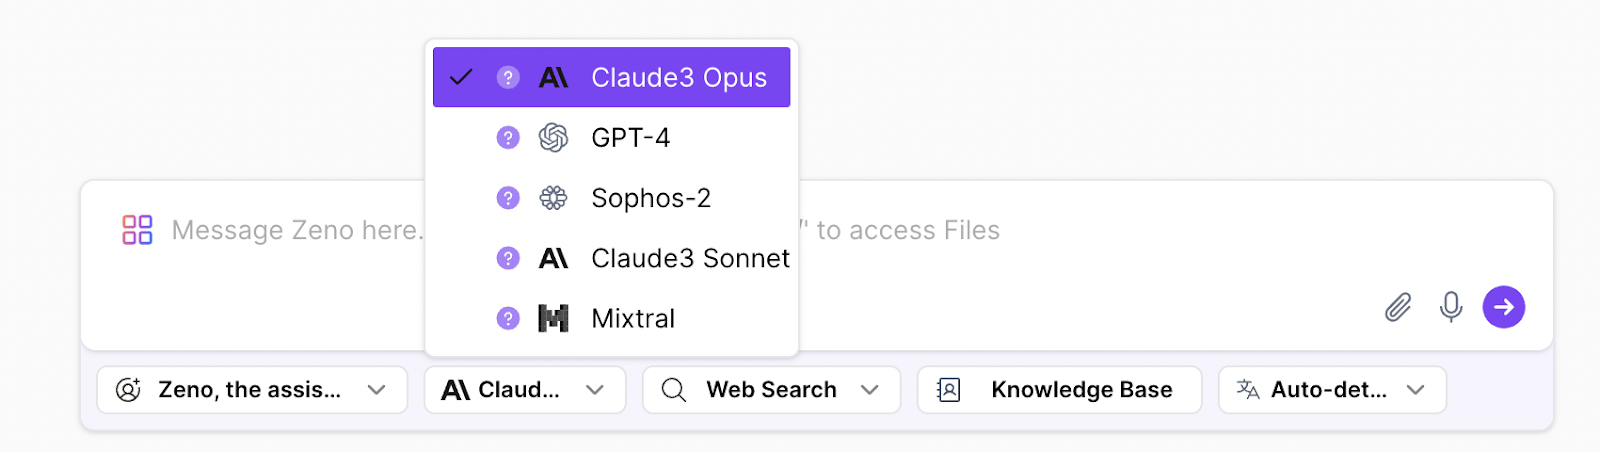 How to access claude 3?